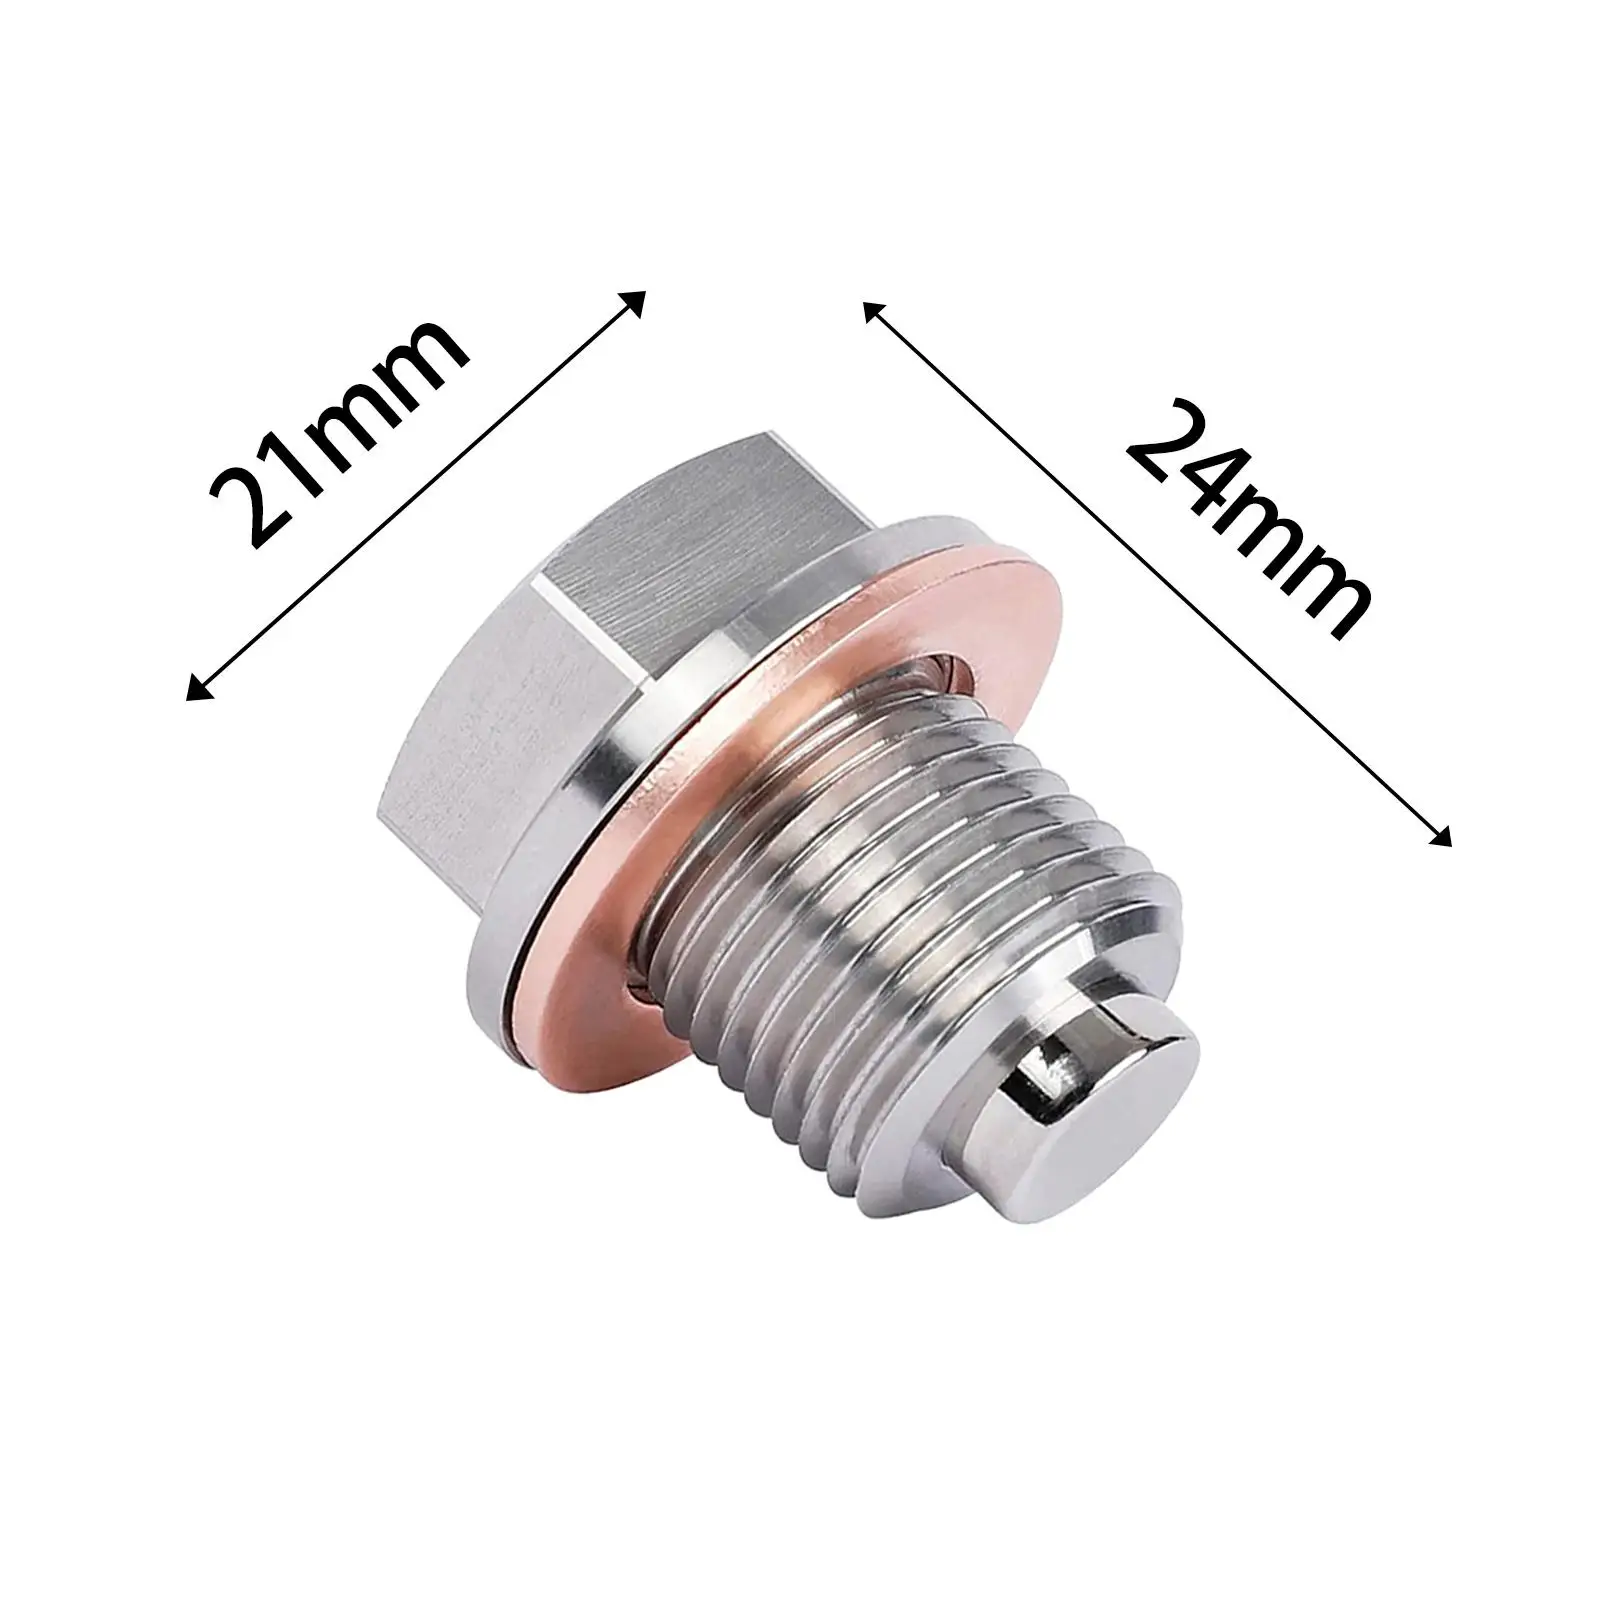 Magnetic Oil Drain Plug M16x1.5 Replace Anti Vibration Heavy Duty Easy to Install Accessories Sump Drain Nut for Motorcycle